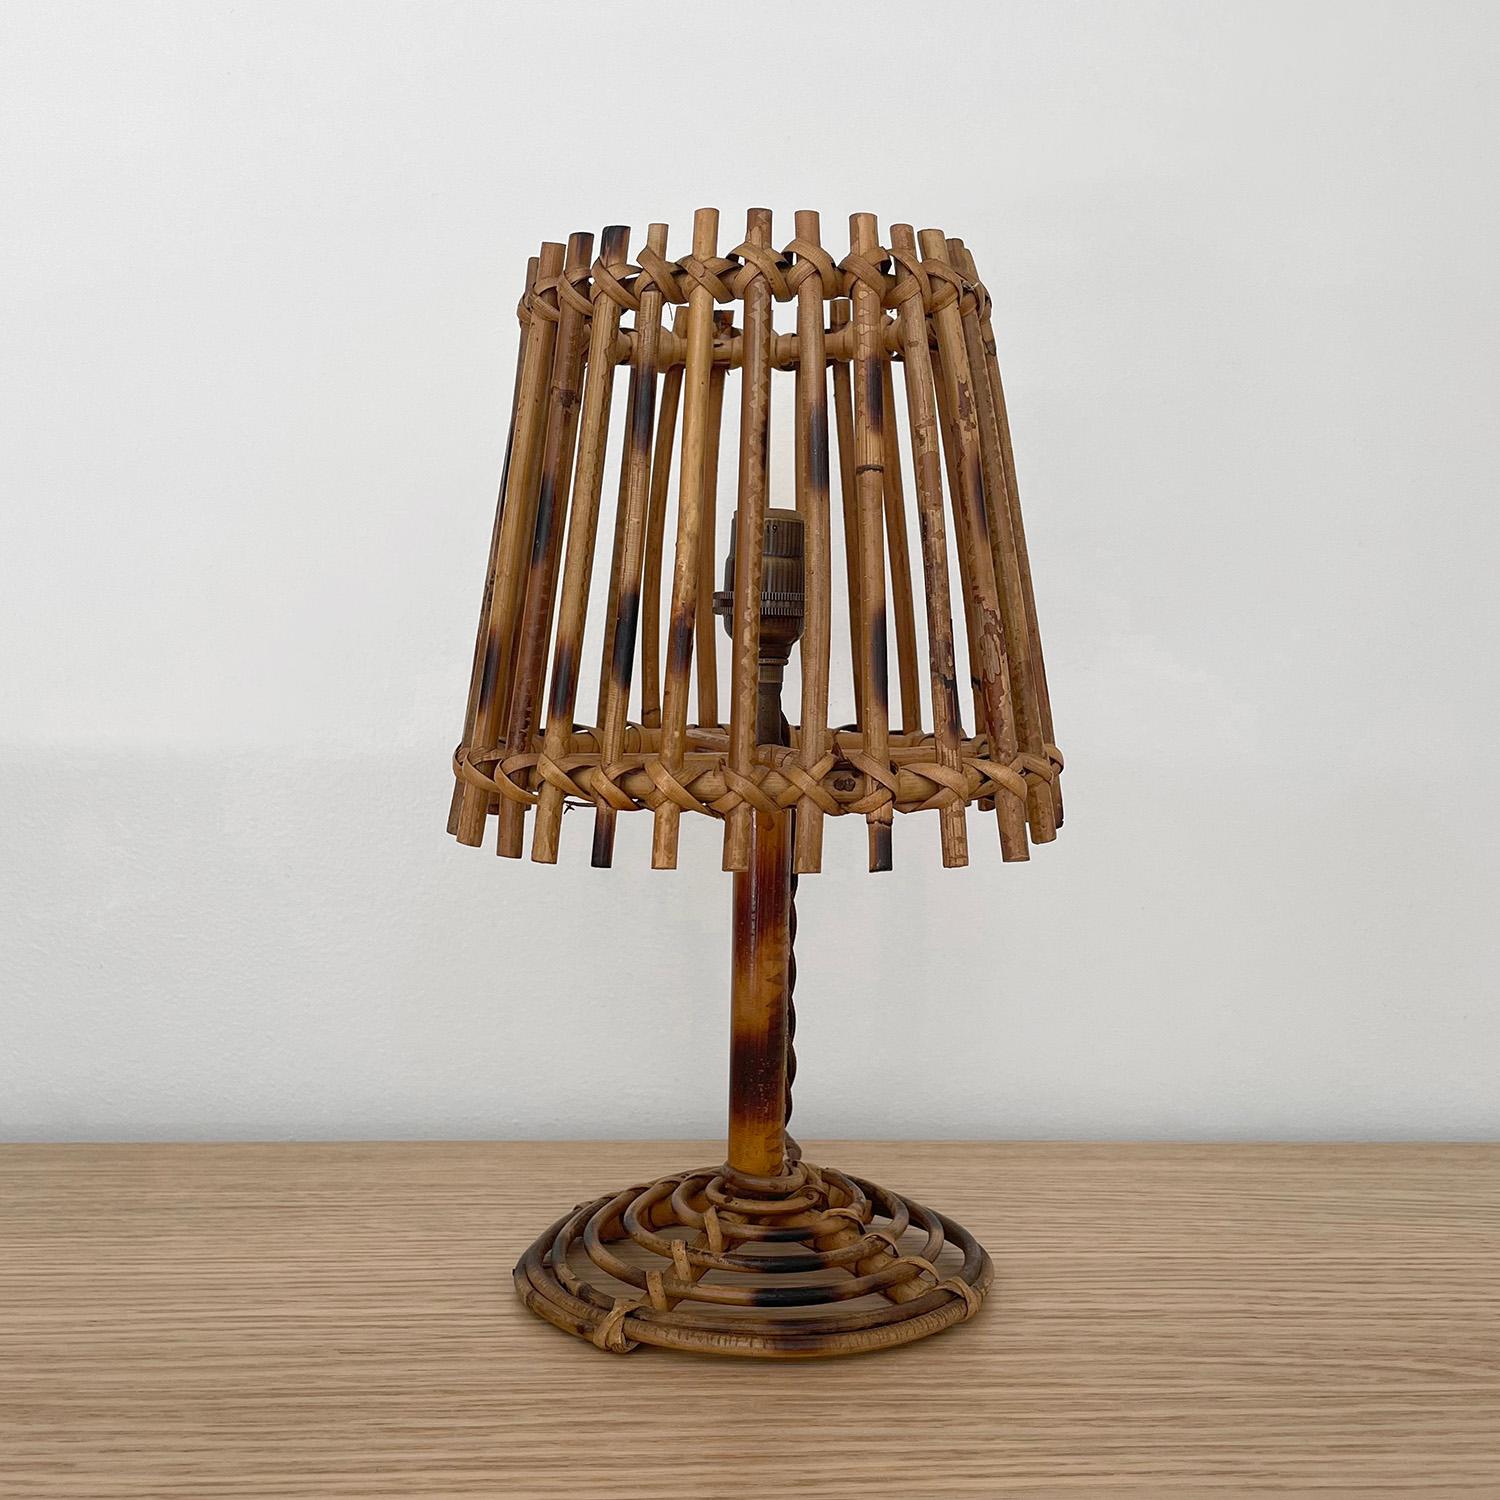 Petite French rattan lamp
Shade is comprised of vertical reeds 
Sculpted spiral base 
Natural color variations throughout
Patina from age and use
Newly rewired silk french twist cord 
Single socket candelabra base bulb 
Last photo is for reference